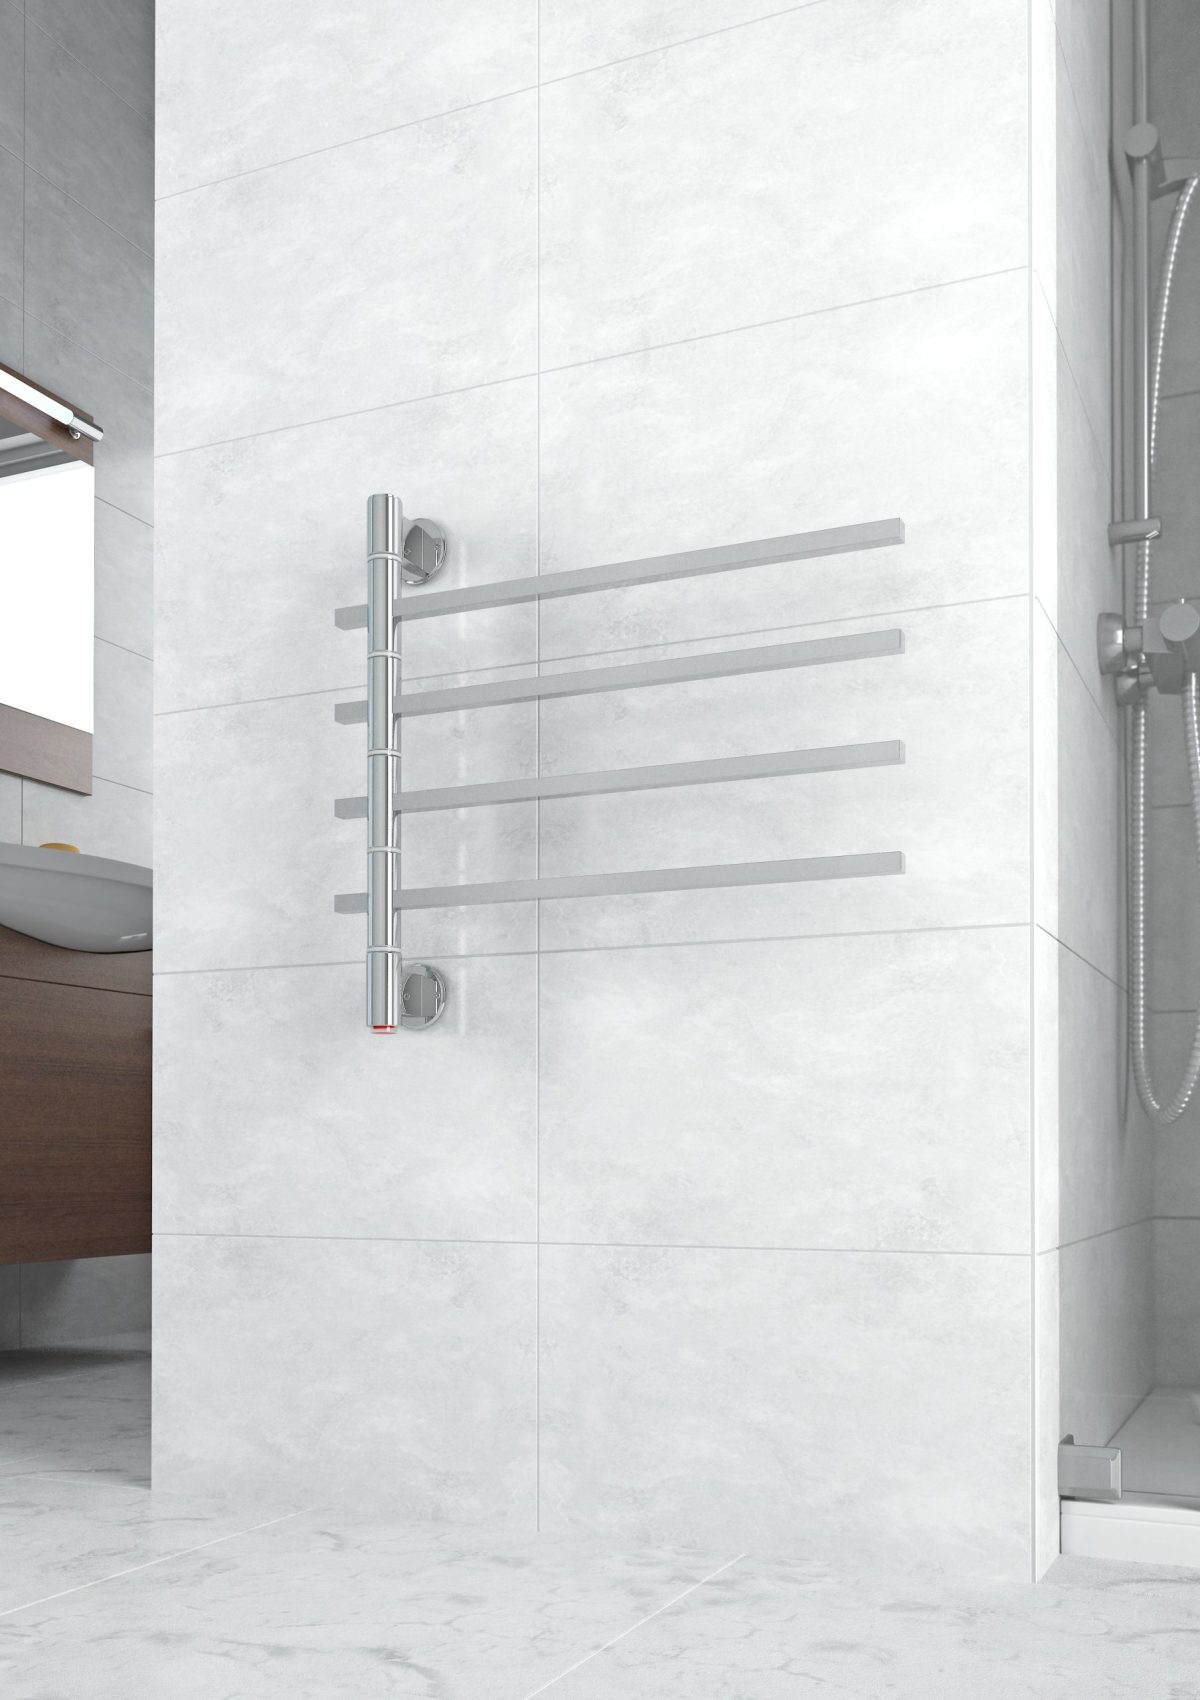 THERMOGROUP SV35 STRAIGHT ROUND SWIVEL HEATED TOWEL RAIL POLISHED STAINLESS STEEL